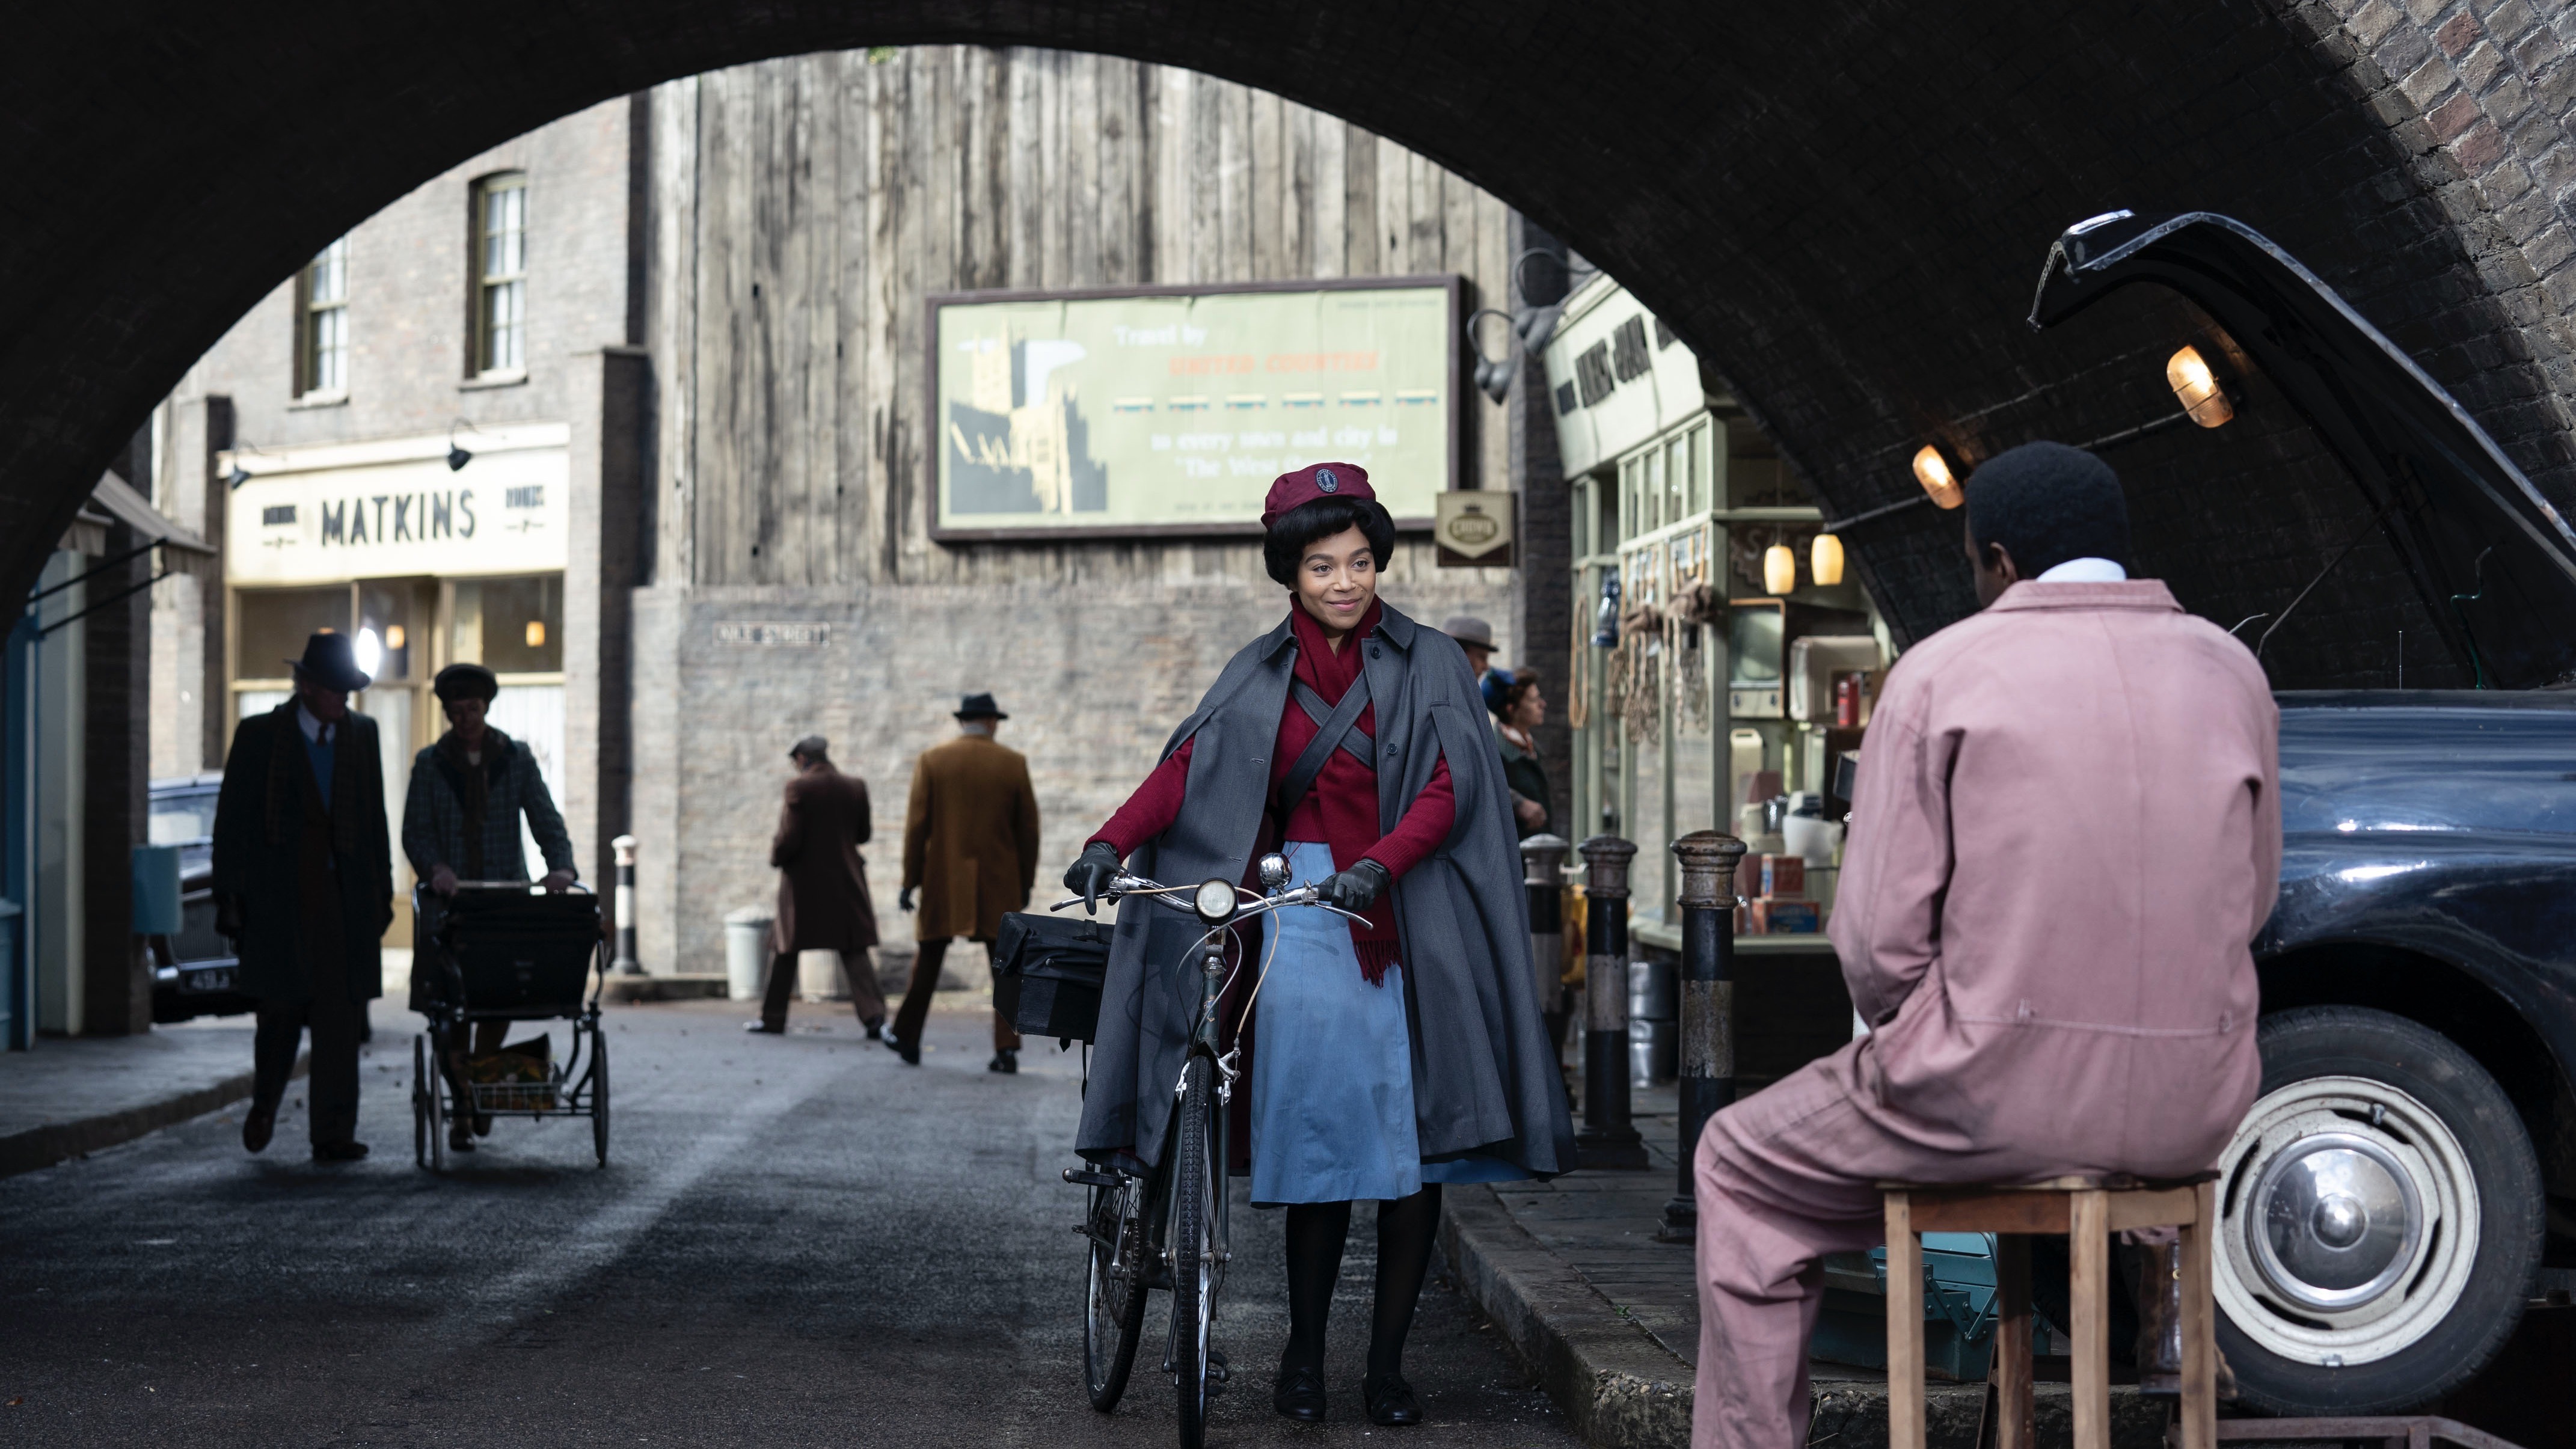 Leonie Elliott in nurse's uniform as Lucille pushes a bike towards Zephryn Taitte in overalls as Cyril in Call the Midwife.